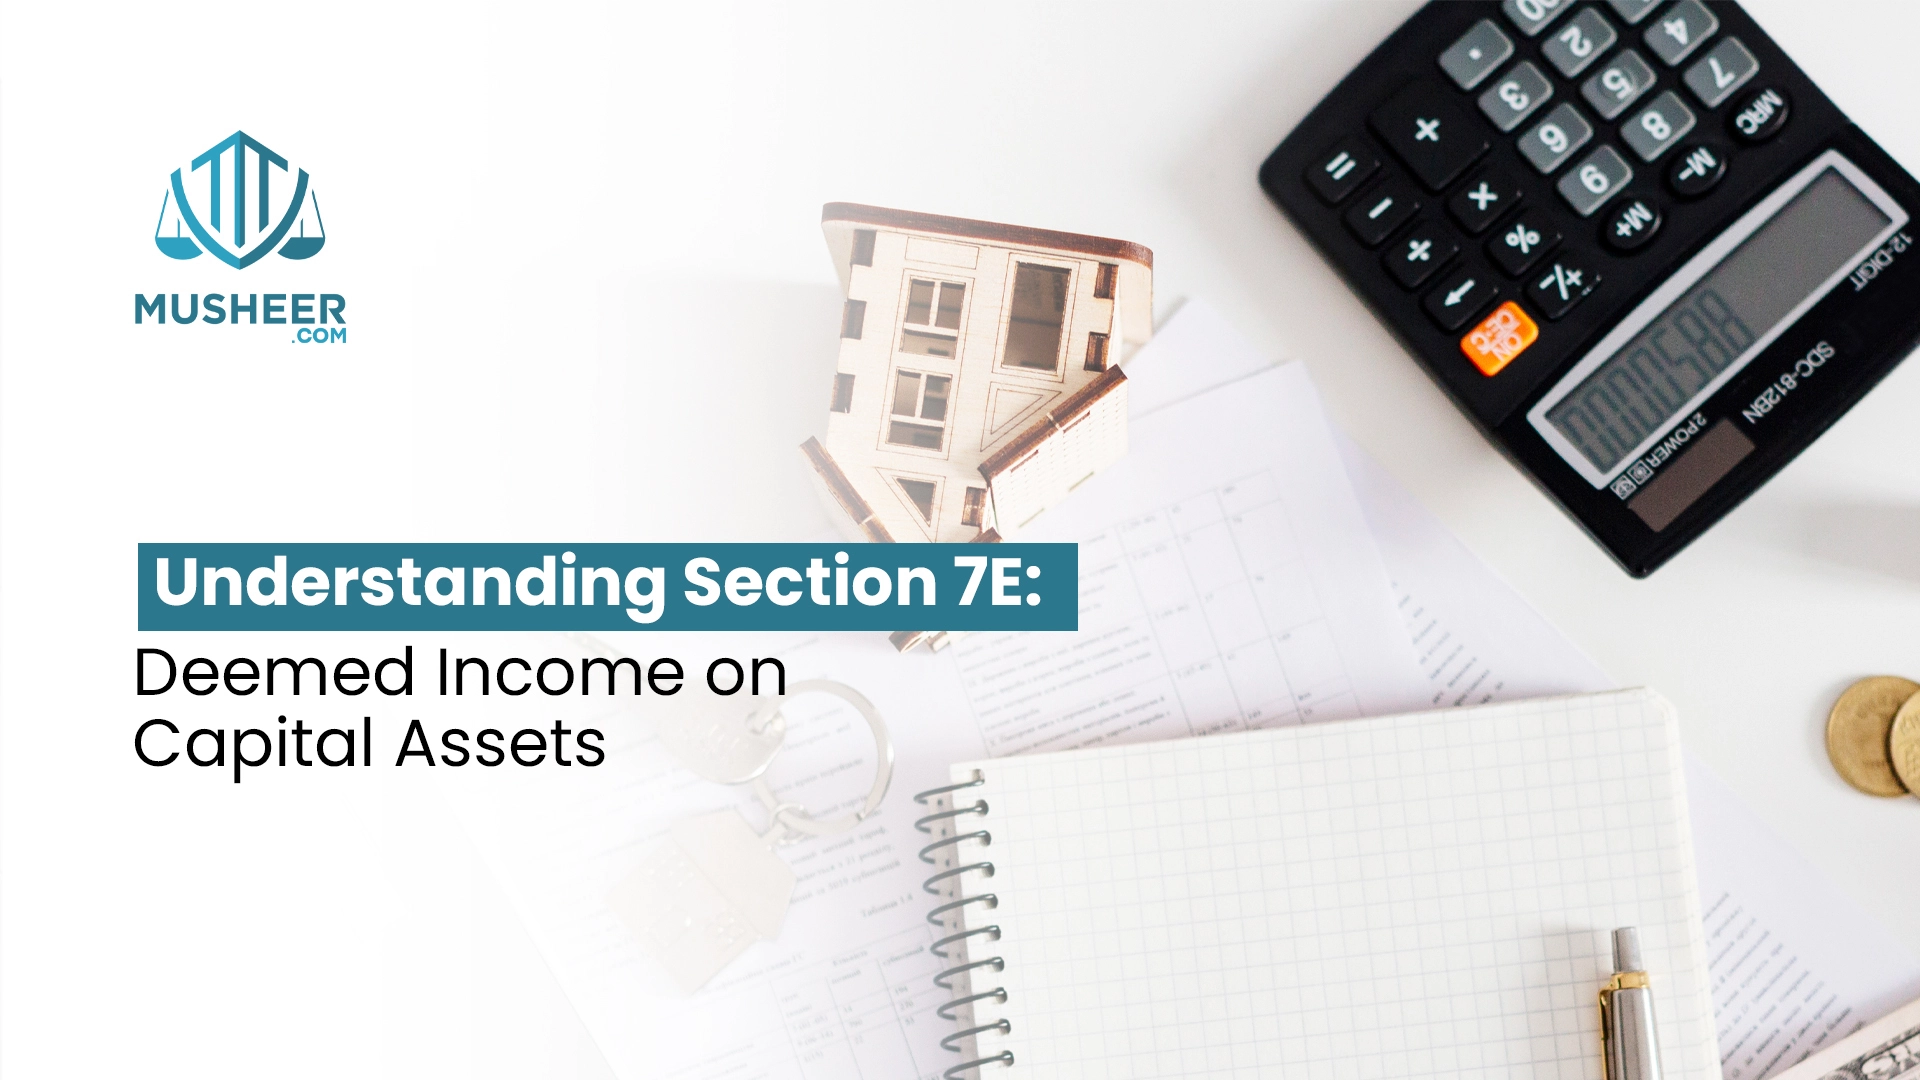 Understanding Section 7E: Deemed Income on Capital Assets